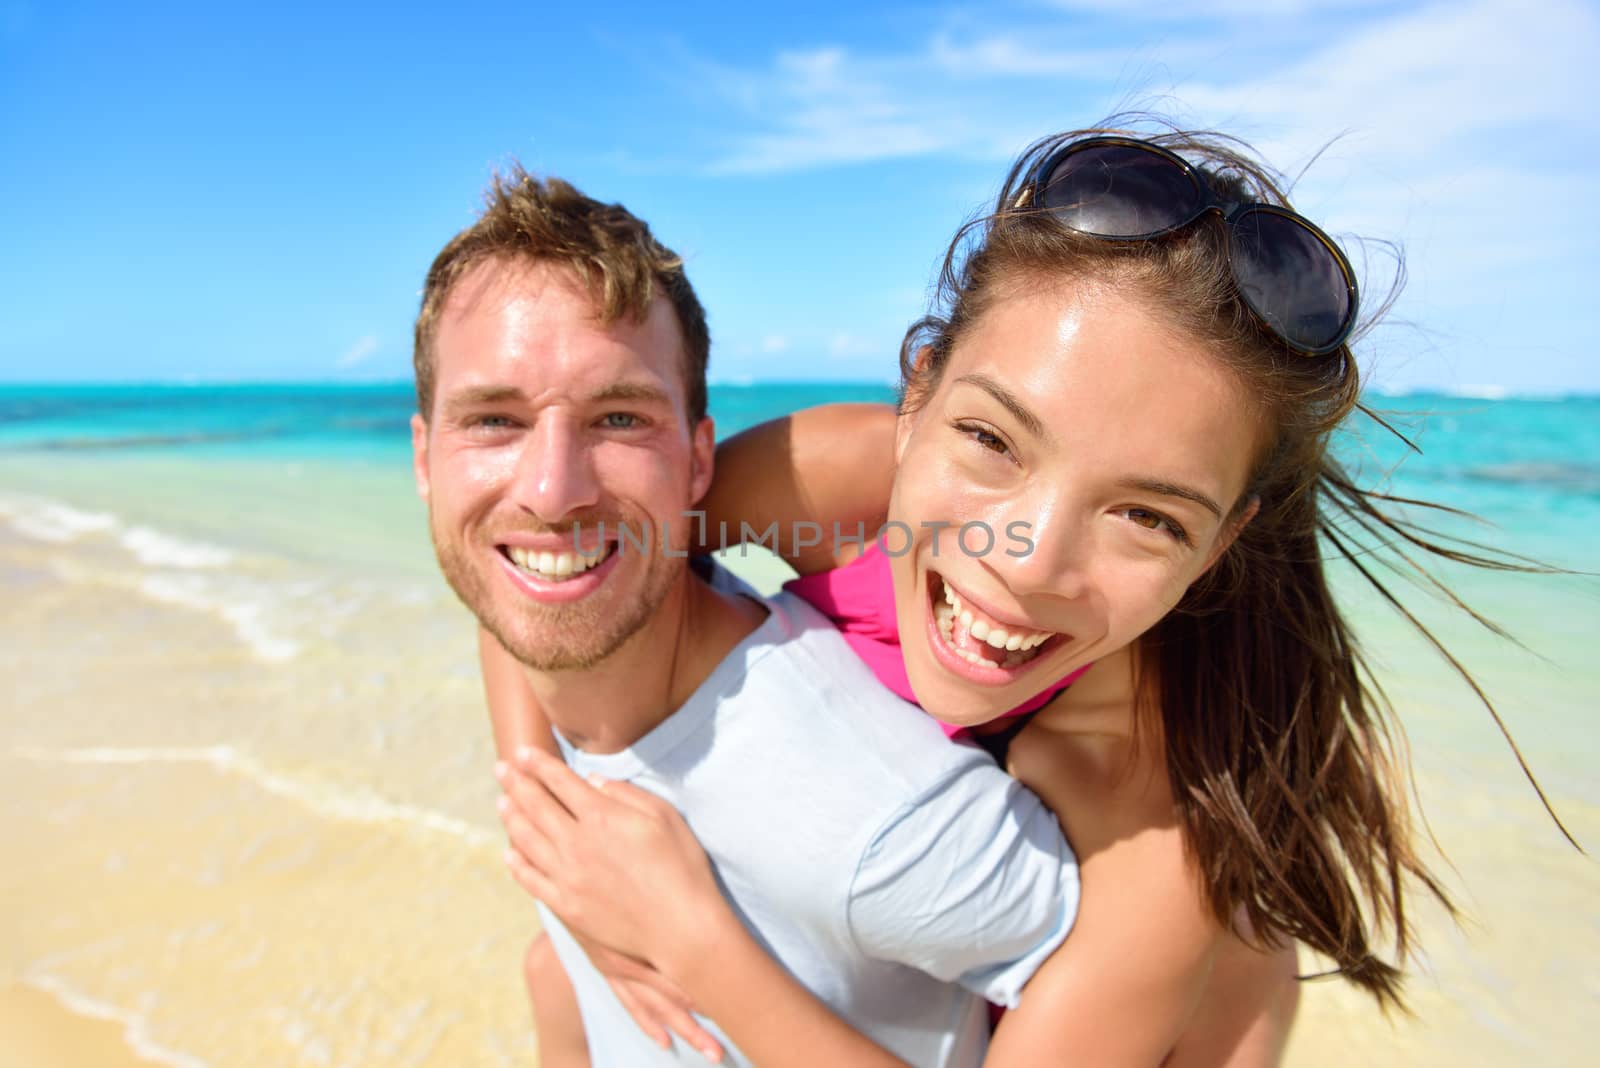 Young couple having fun laughing on beach holidays by Maridav